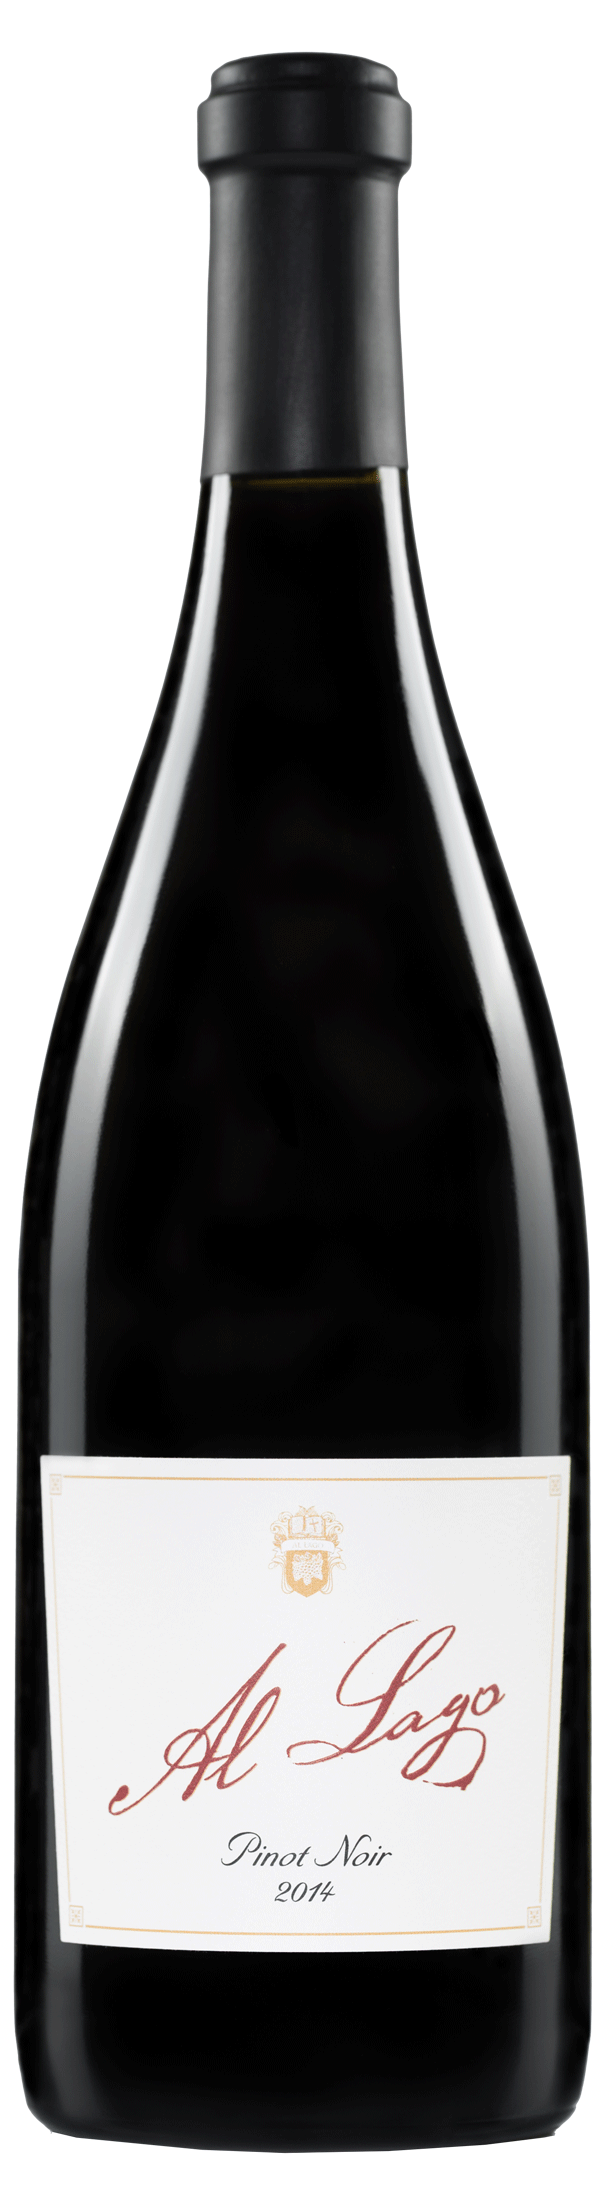 Product Image for 2014 Pinot Noir